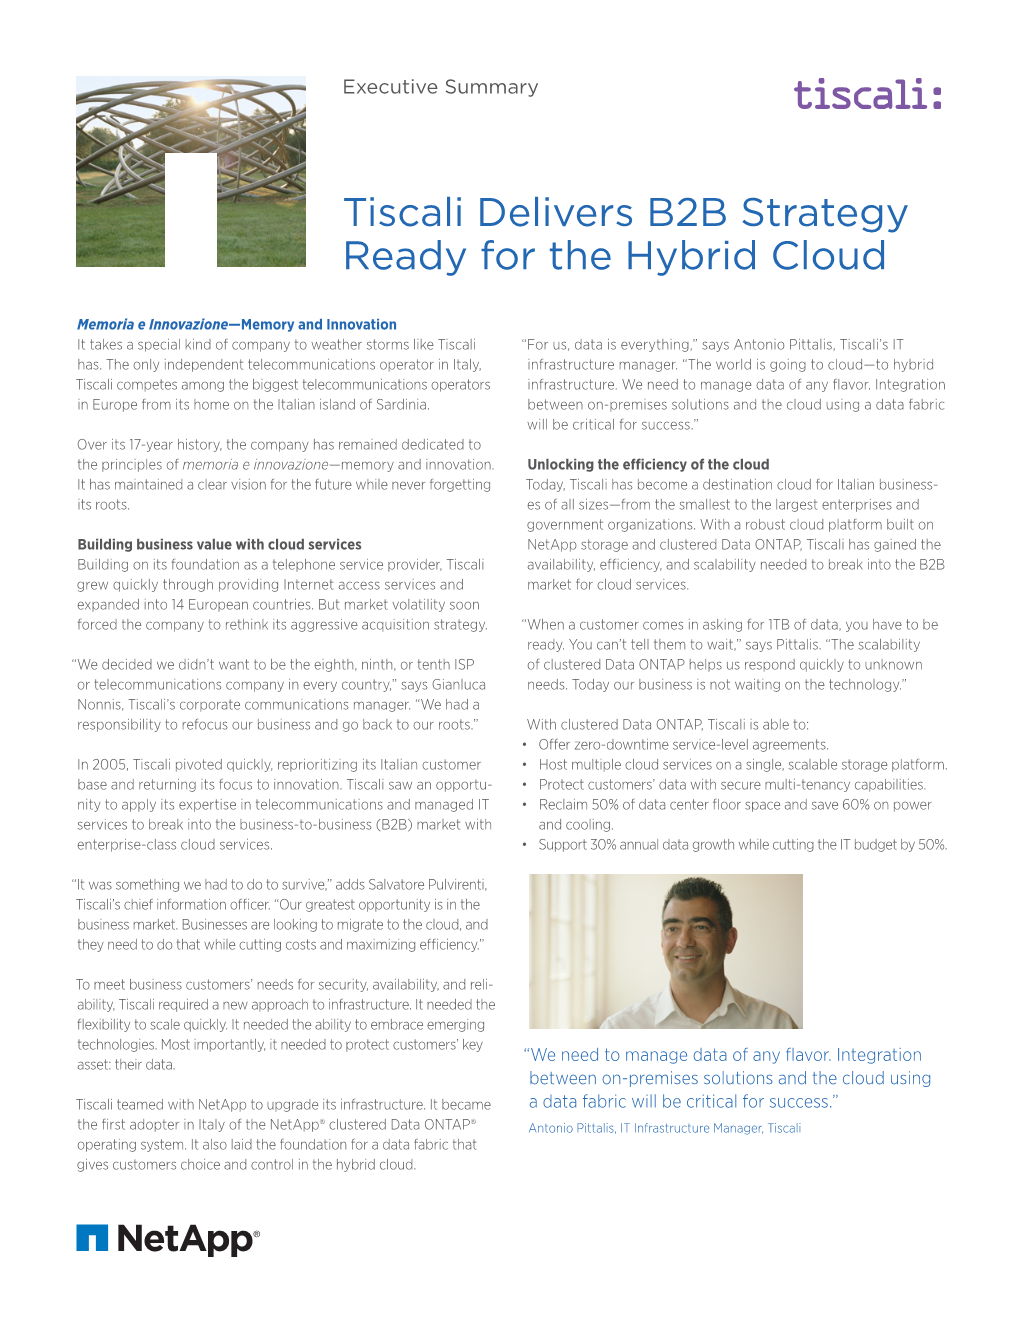 Tiscali Delivers B2B Strategy Ready for the Hybrid Cloud